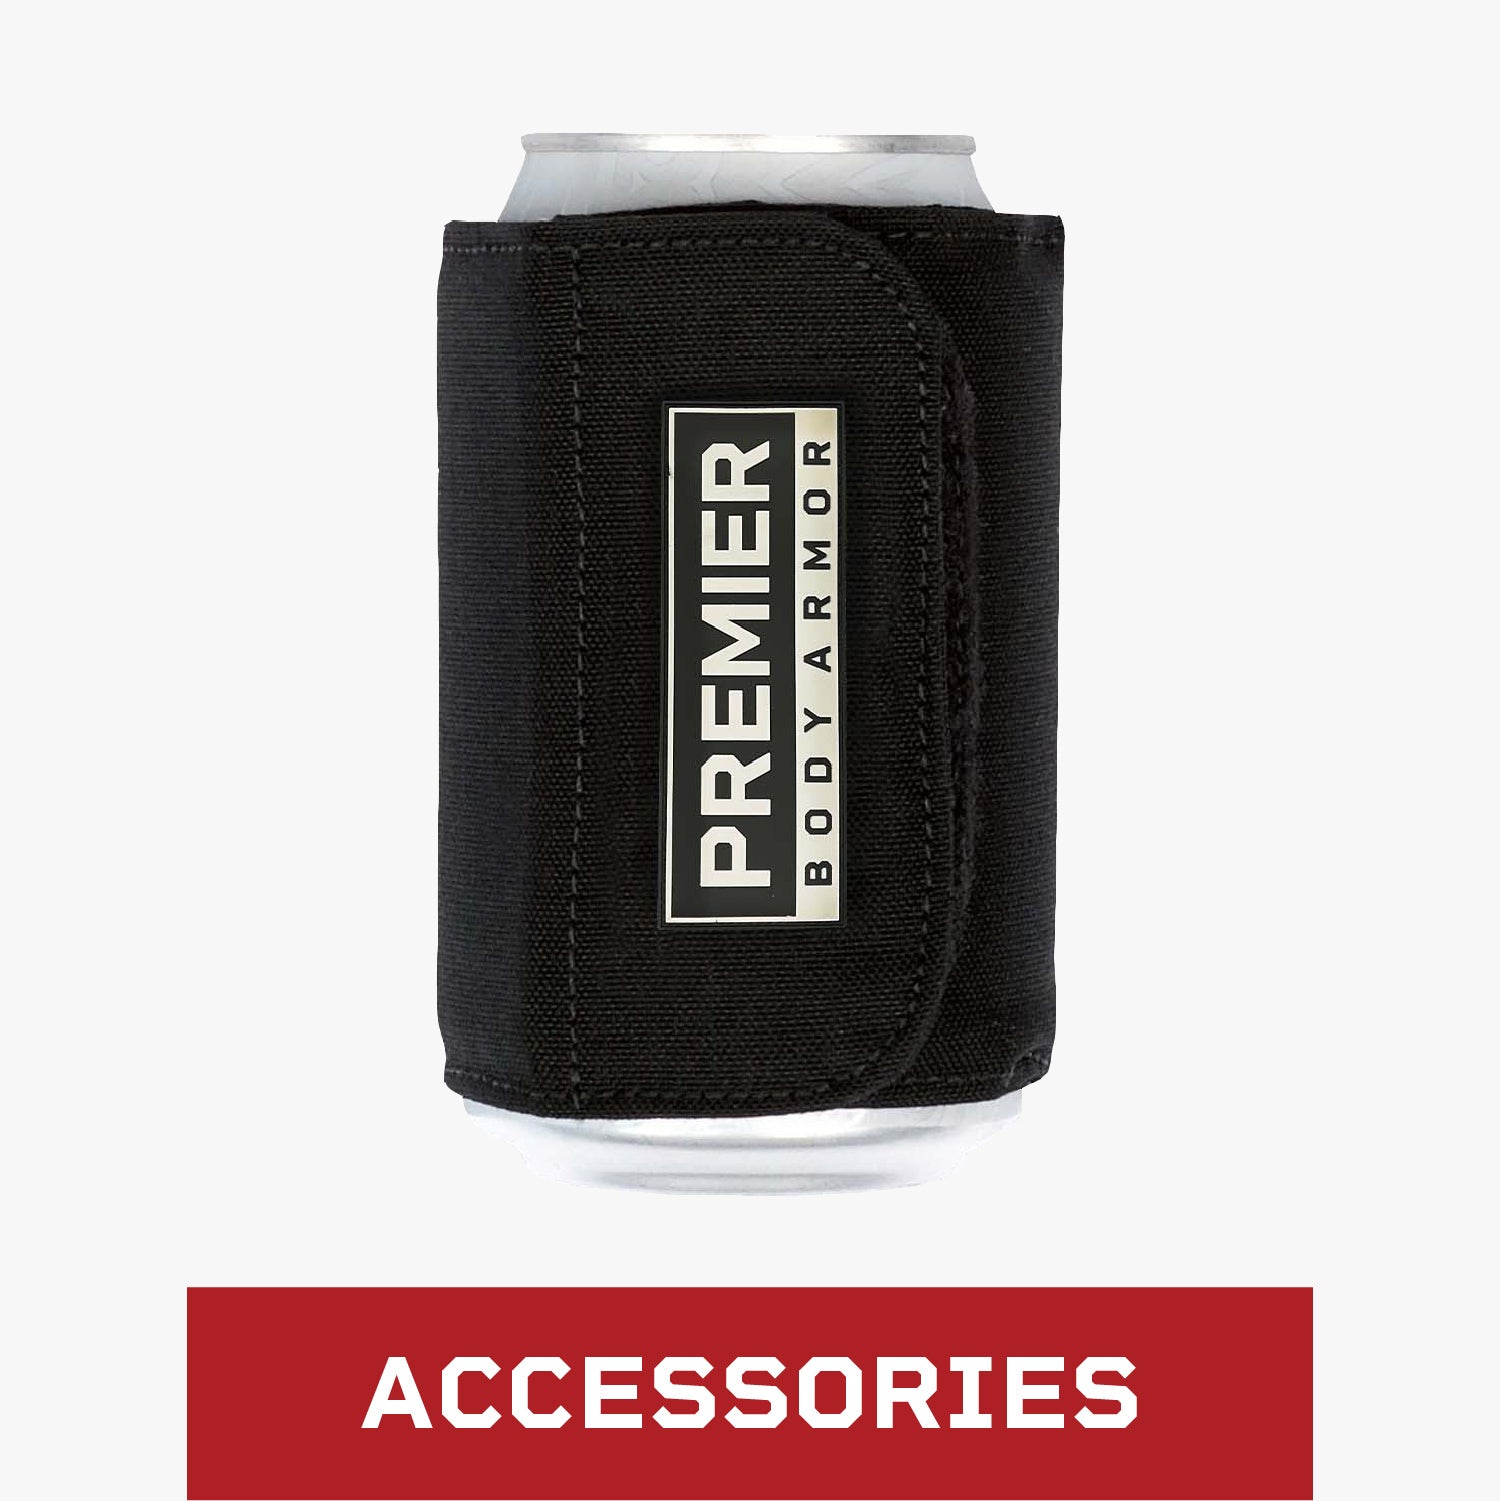 collection of bulletproof armor accessories and plate carrier accessories. Pick up the only bulletproof koozie and bulletproof wallet along with Premier Body Armor t-shirts, vertx tactigami, viktos jackets, and much more. 